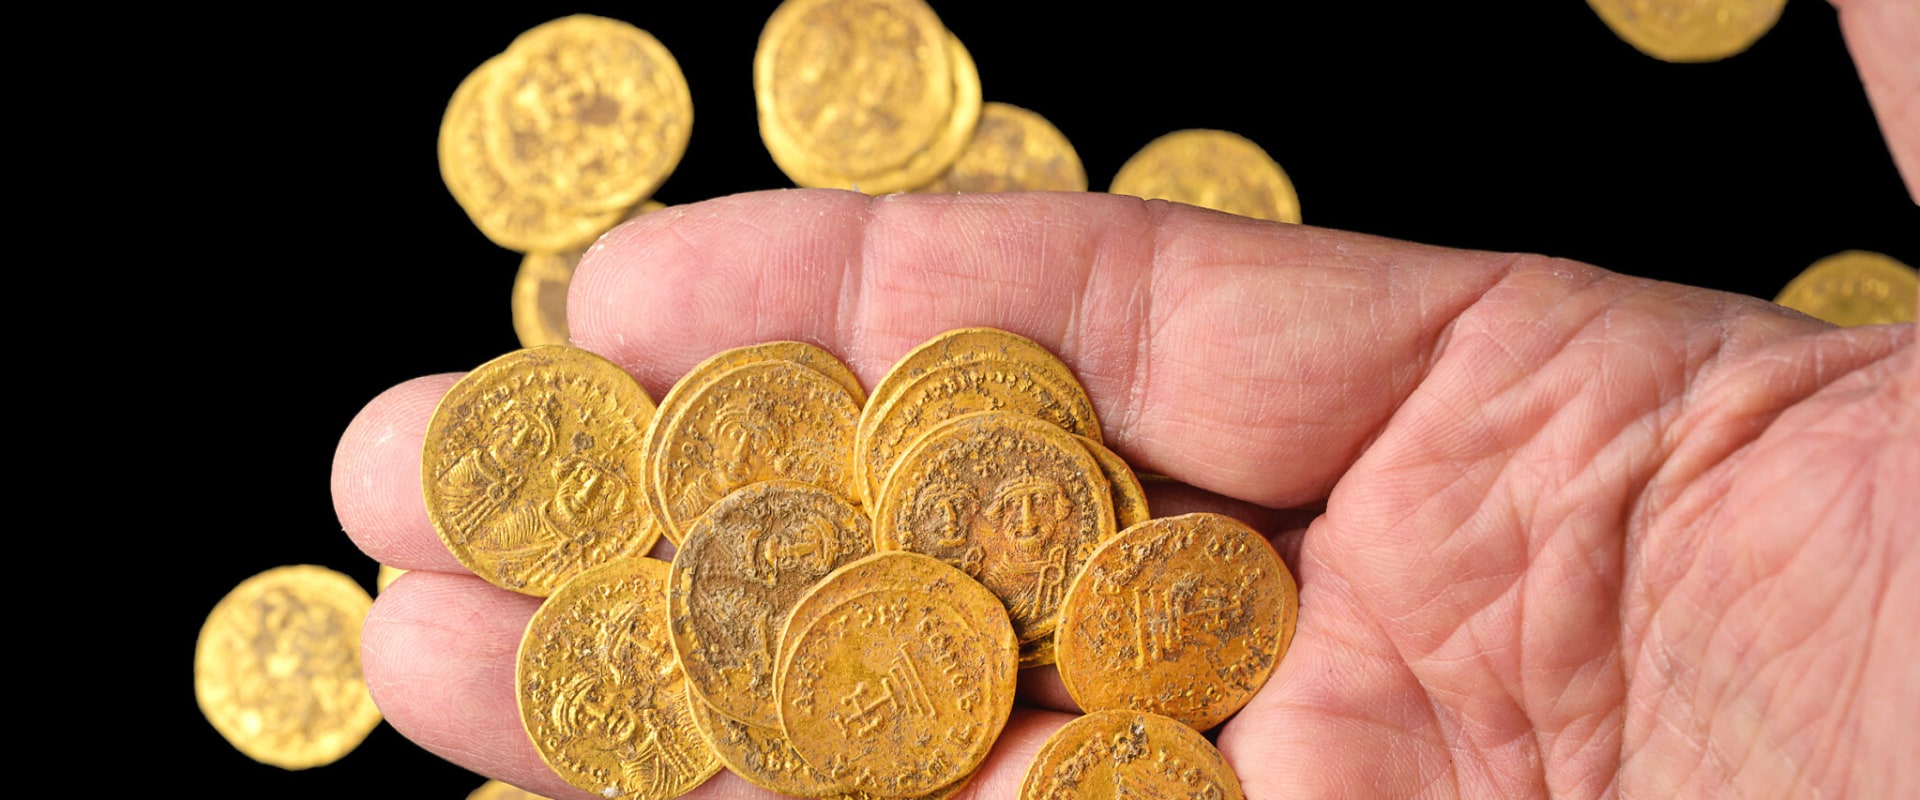 What gold coins are not taxable?